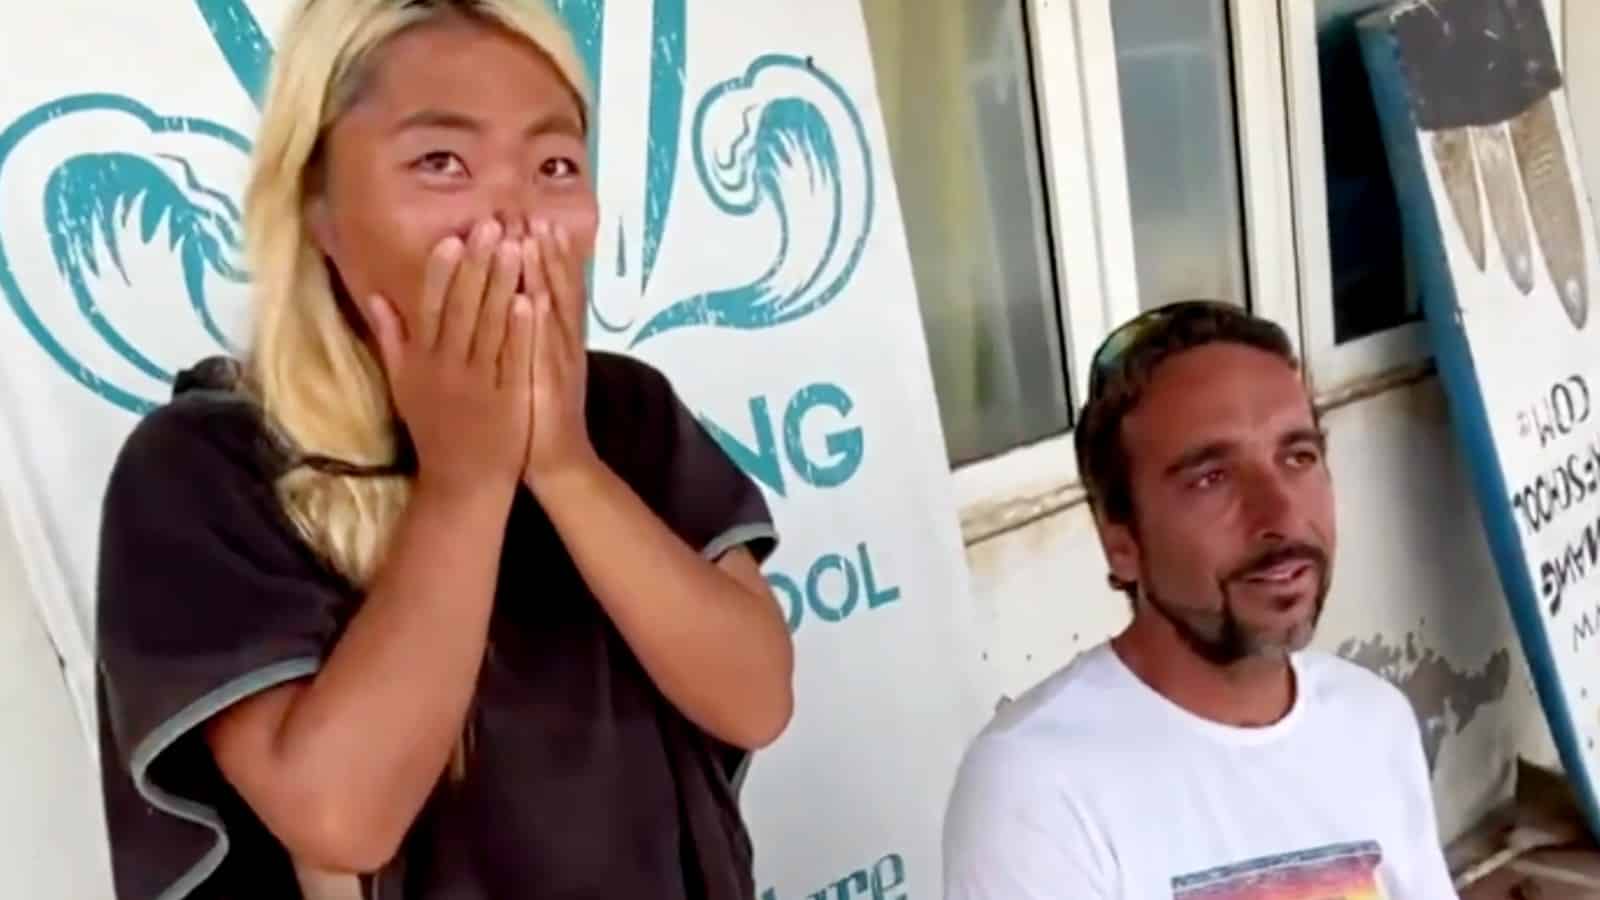 Surfing teachers shoced after Twitch streamer's chat pays for stolen wallet